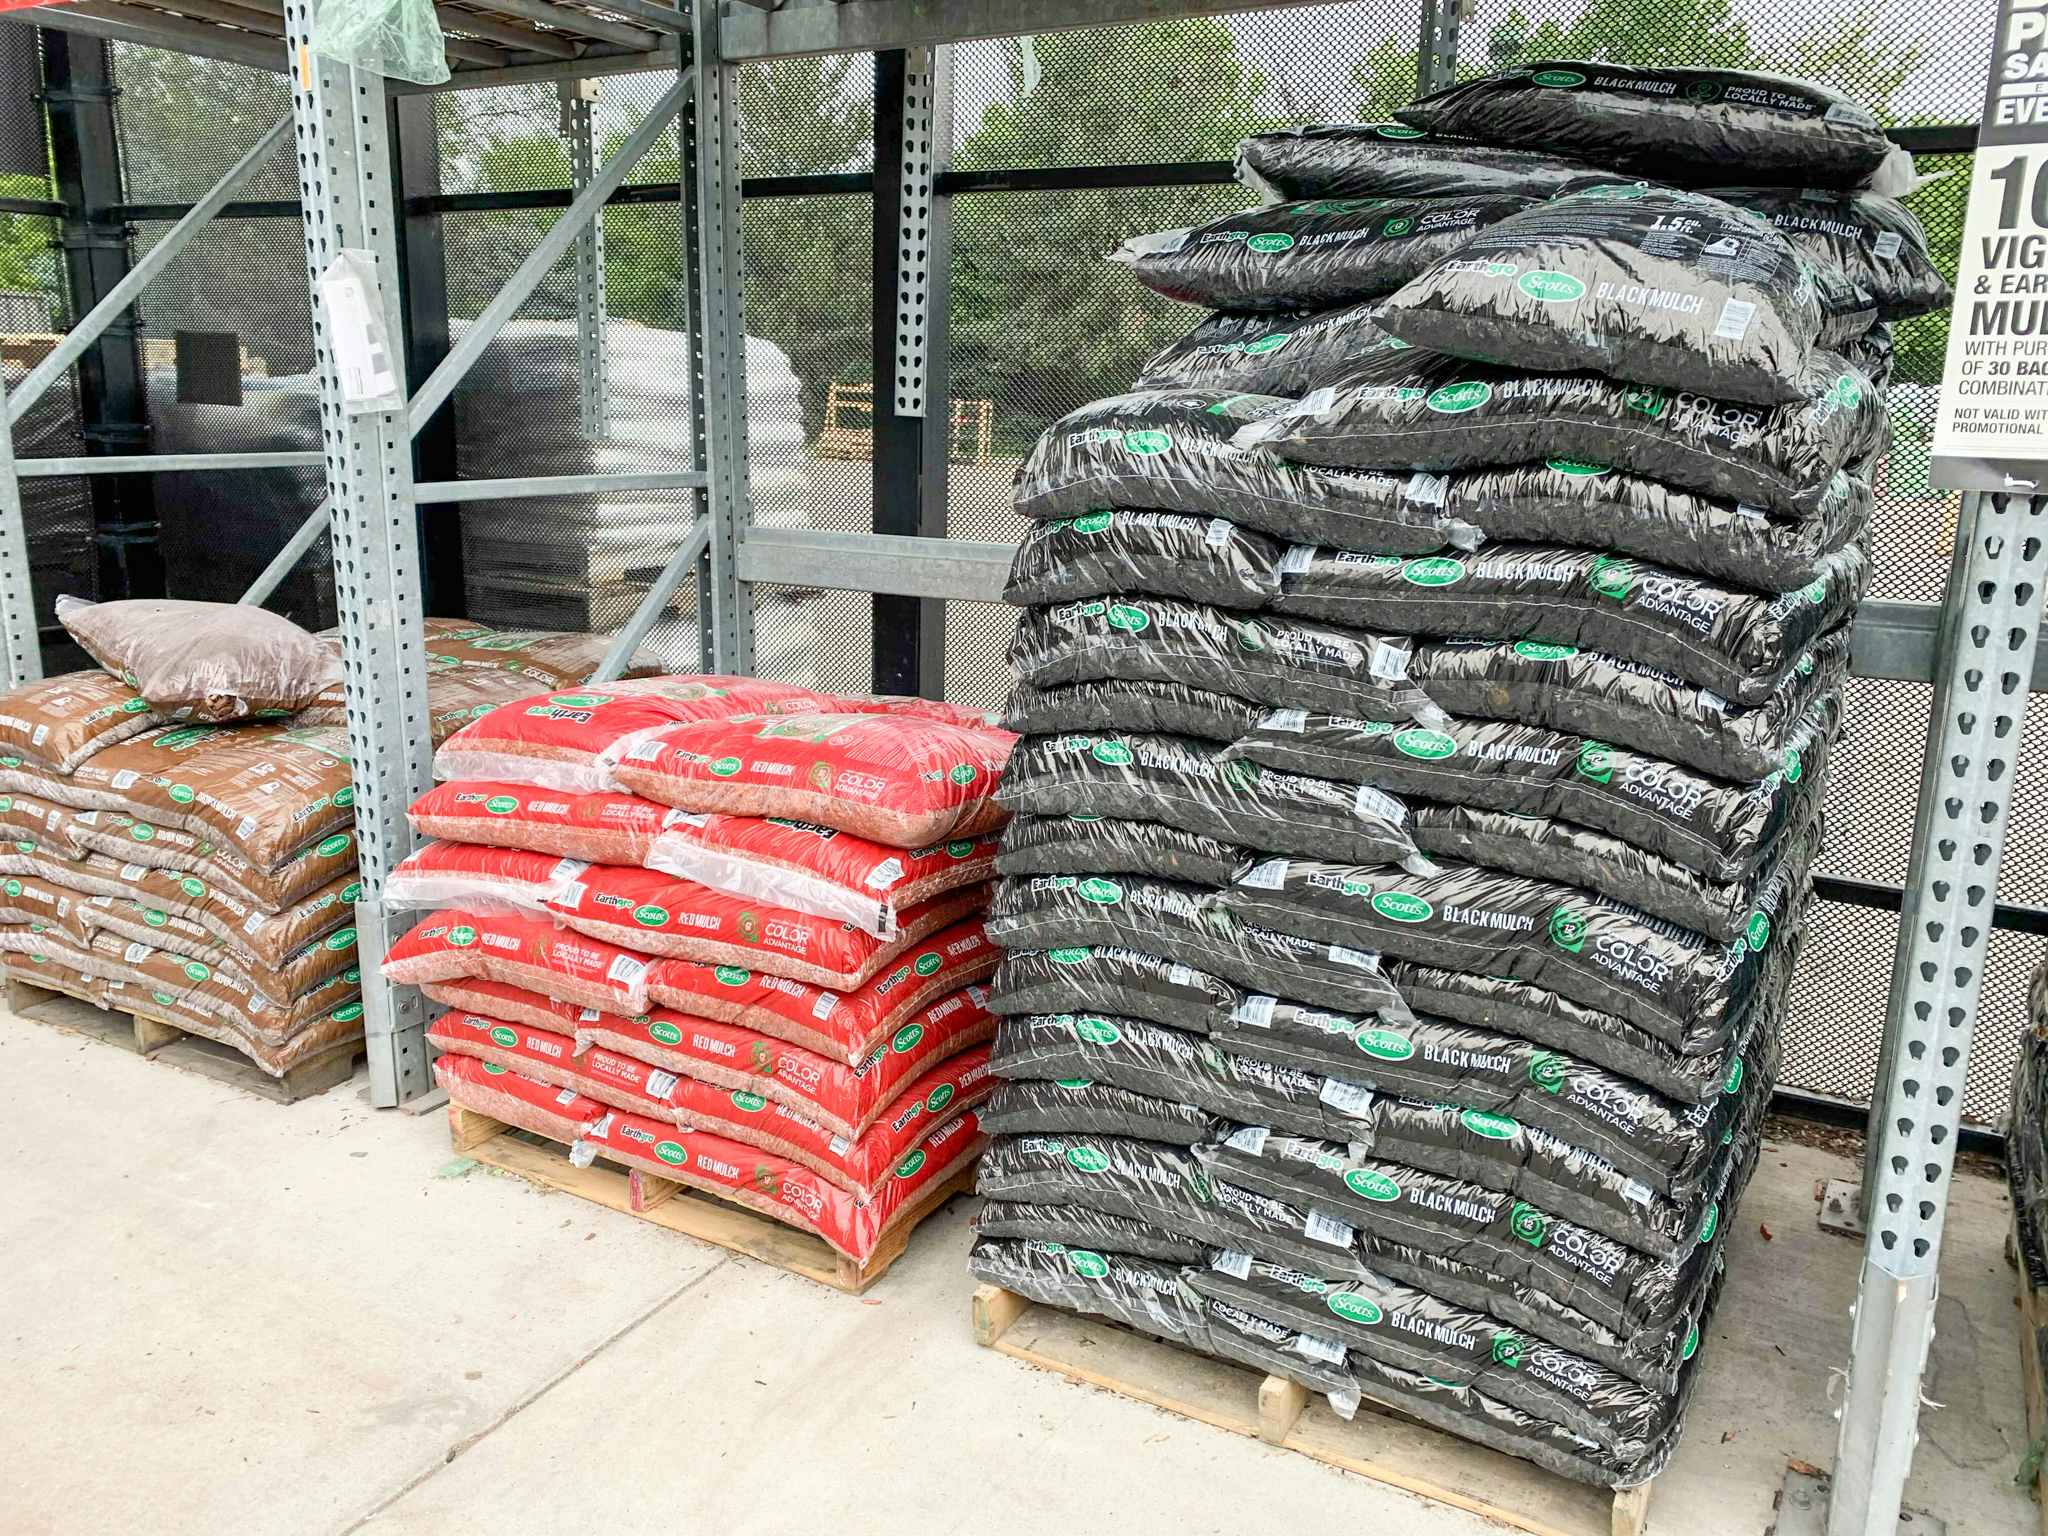 Piles of black, red, and brow mulch stacked next to each other. 